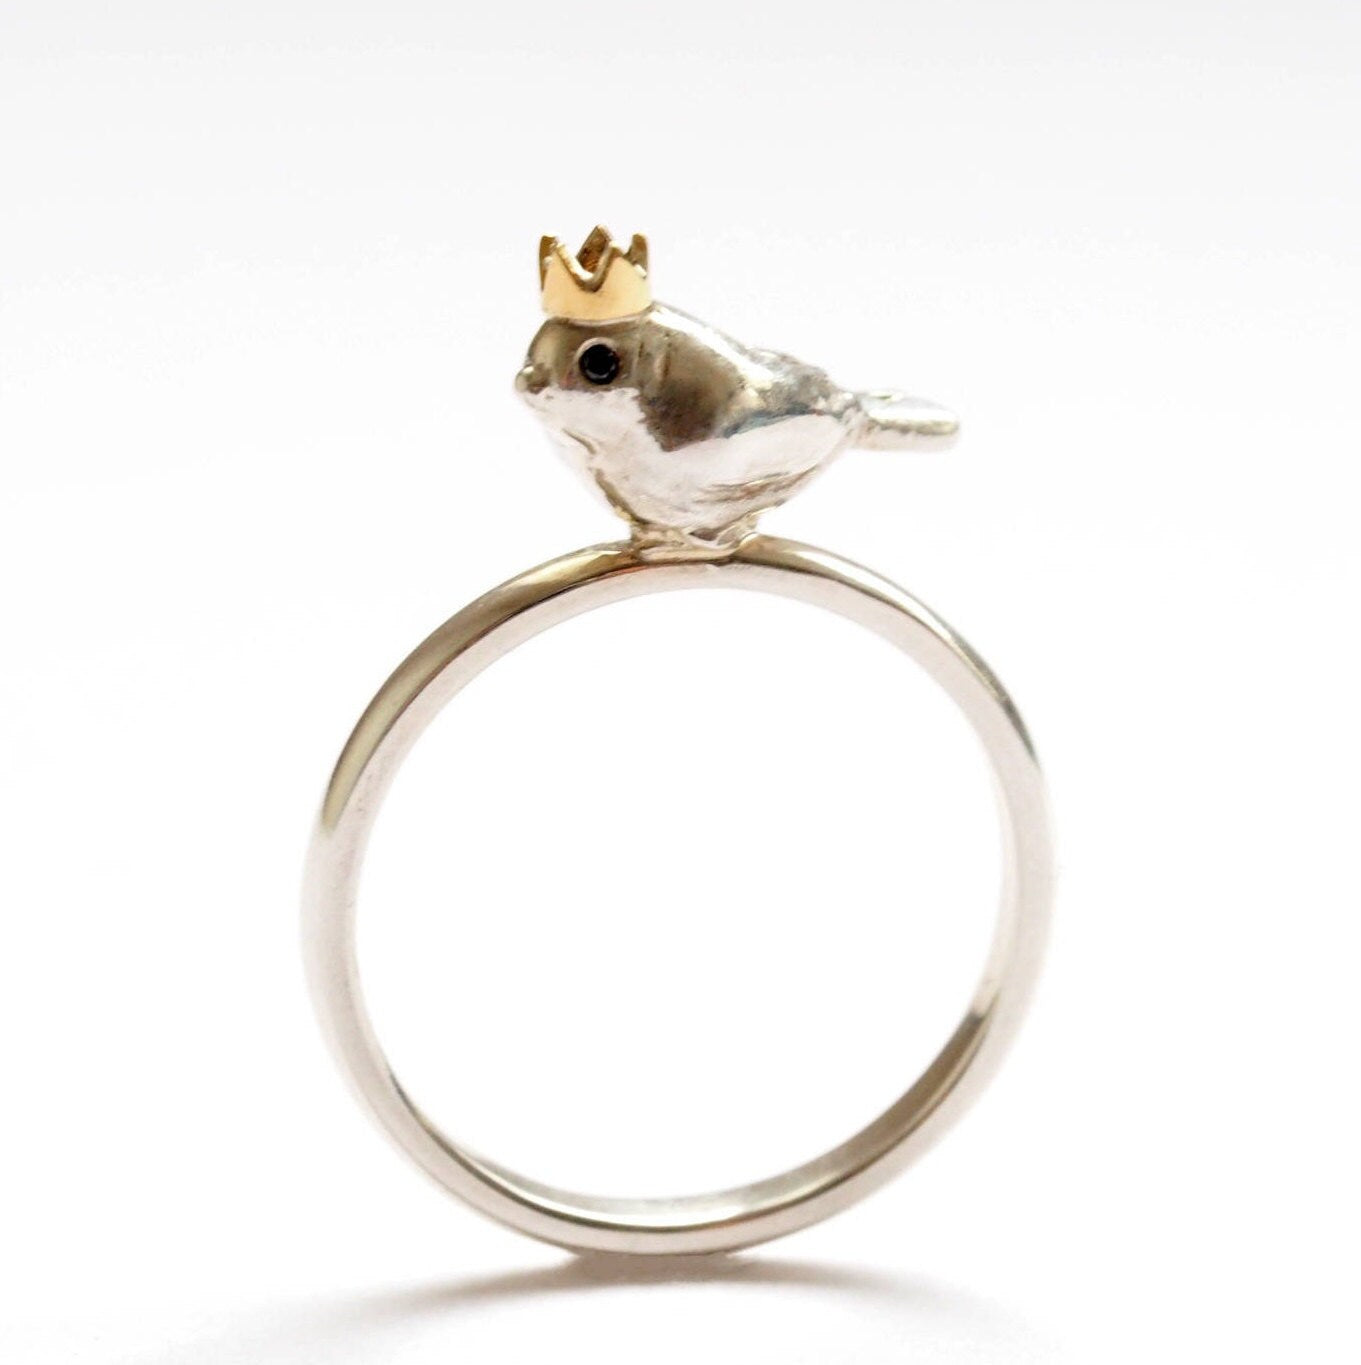 Bird King Ring - Recycled Sterling Silver, Black Diamonds, 9ct Yellow Gold Crown